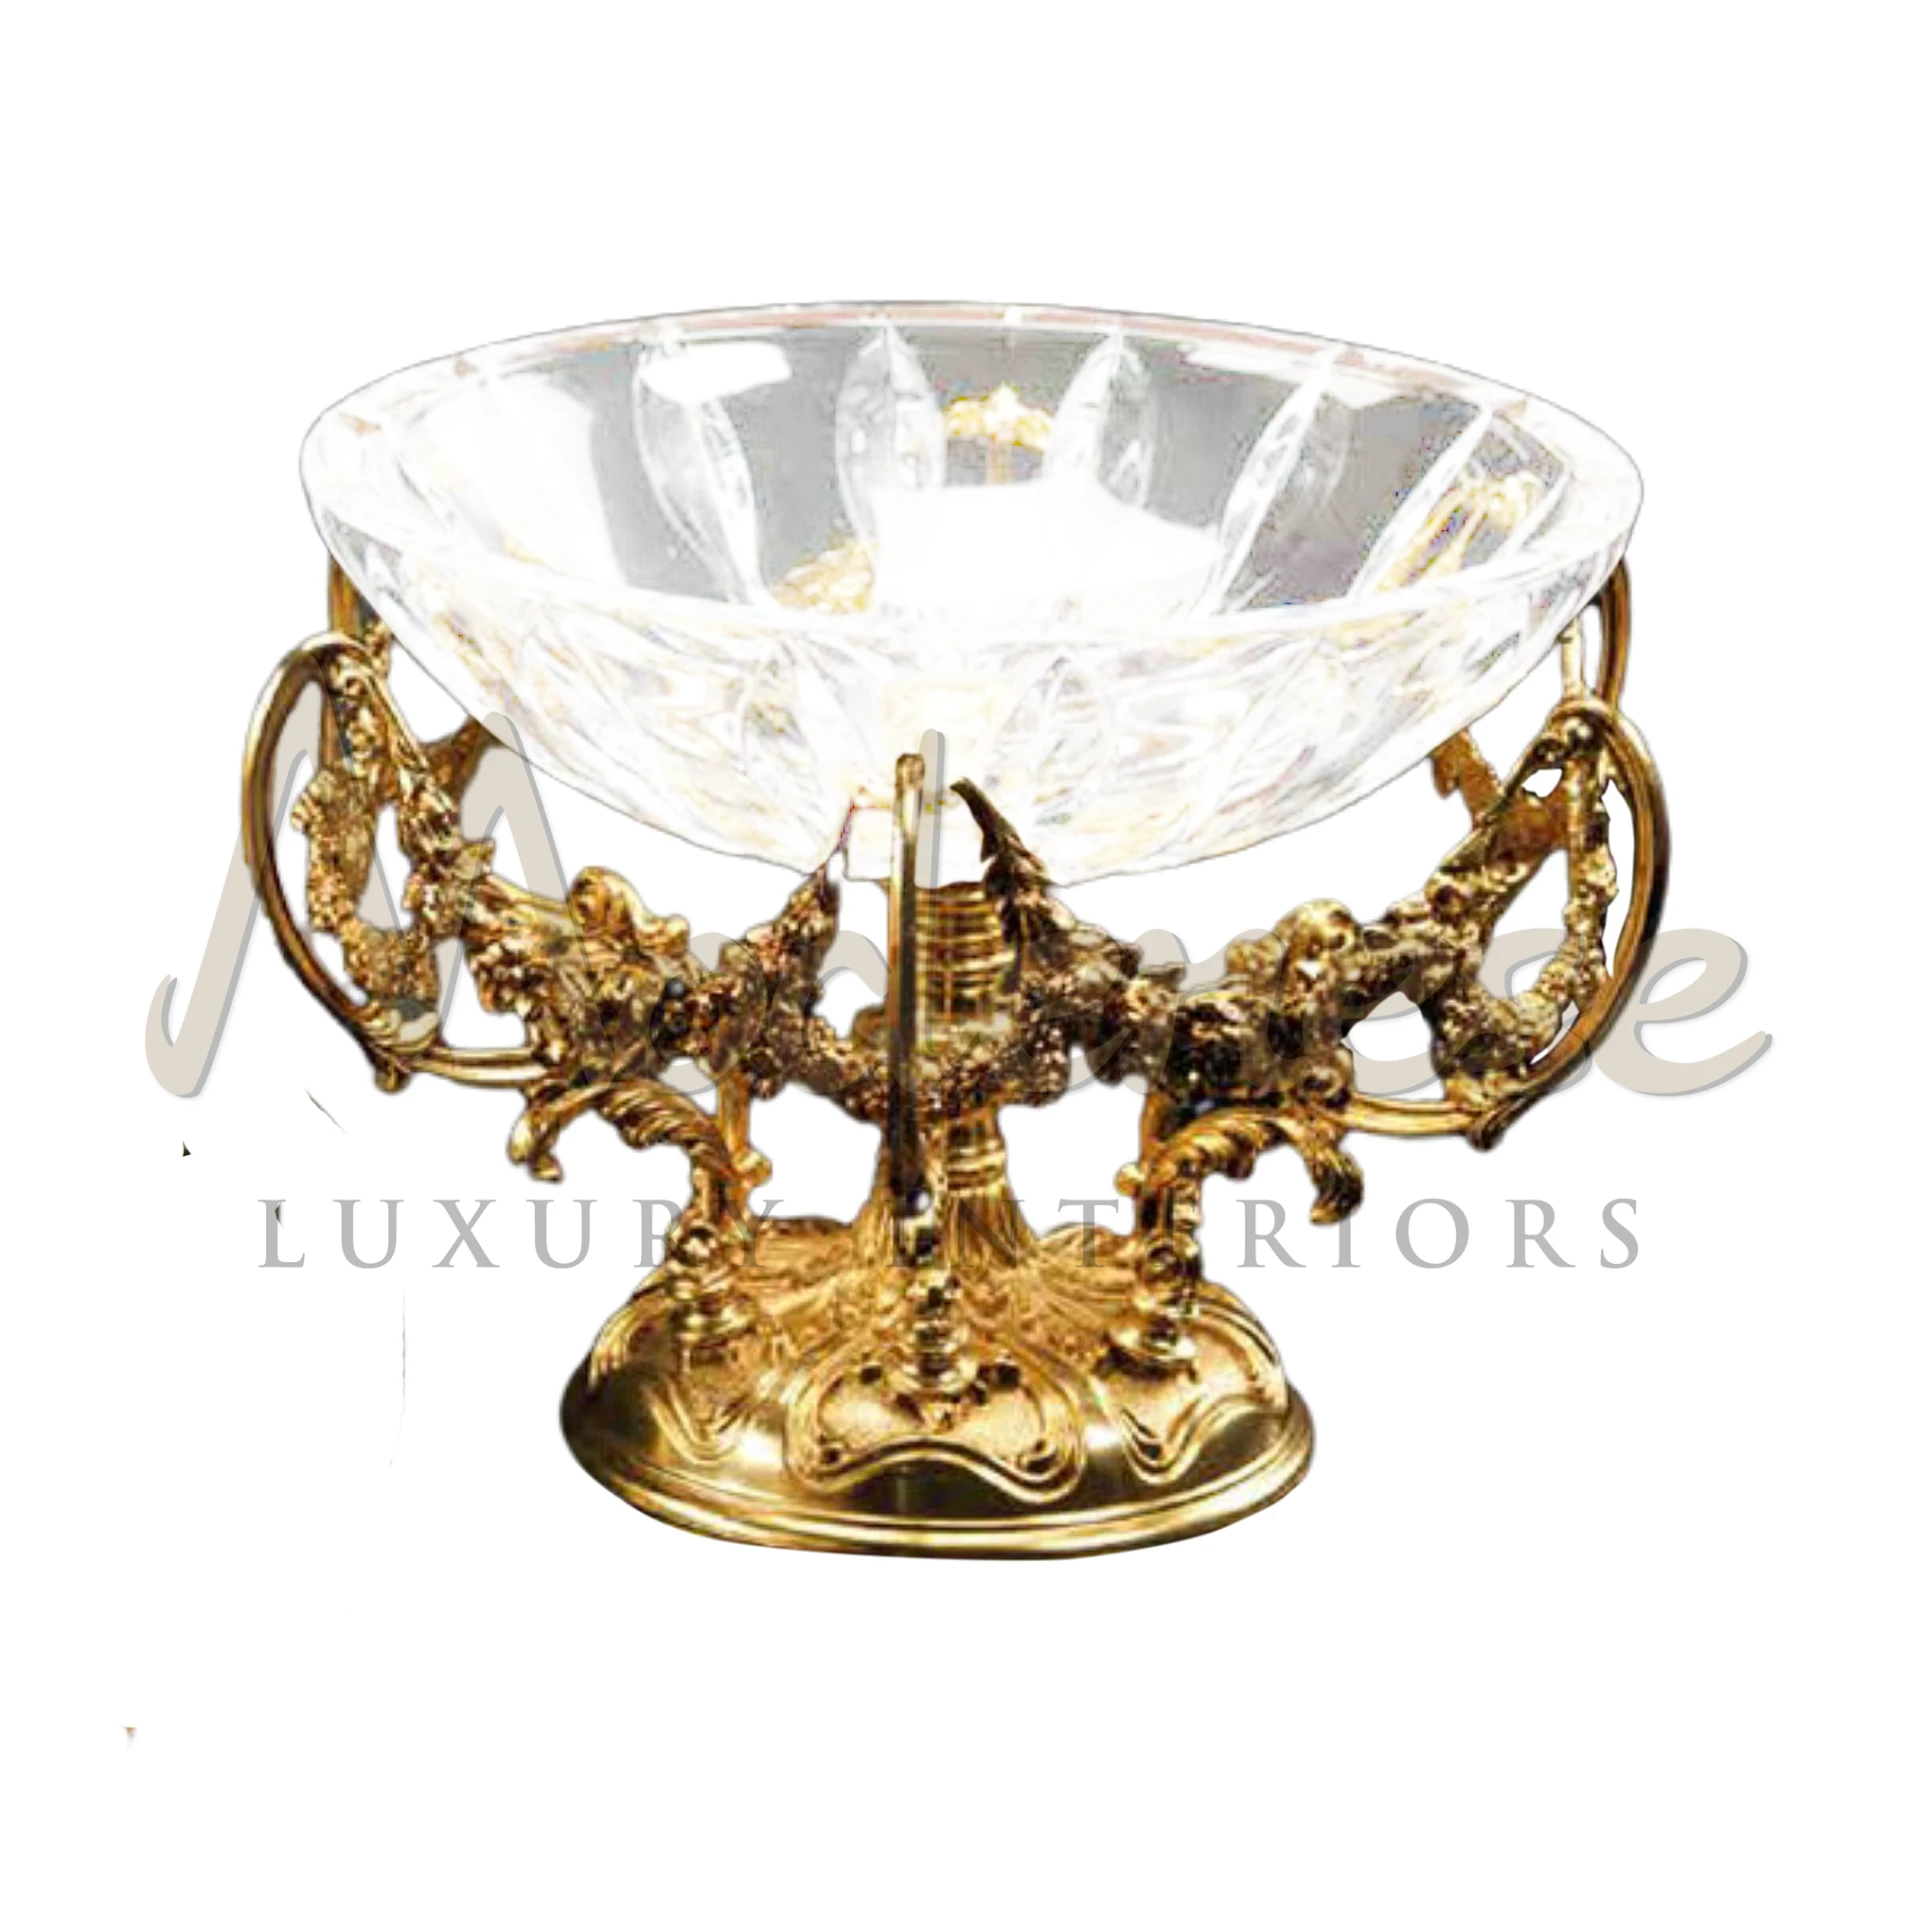 Contemporary Modenese Stylish Glass Bowl, showcasing superior craftsmanship for a modern, luxurious interior design.